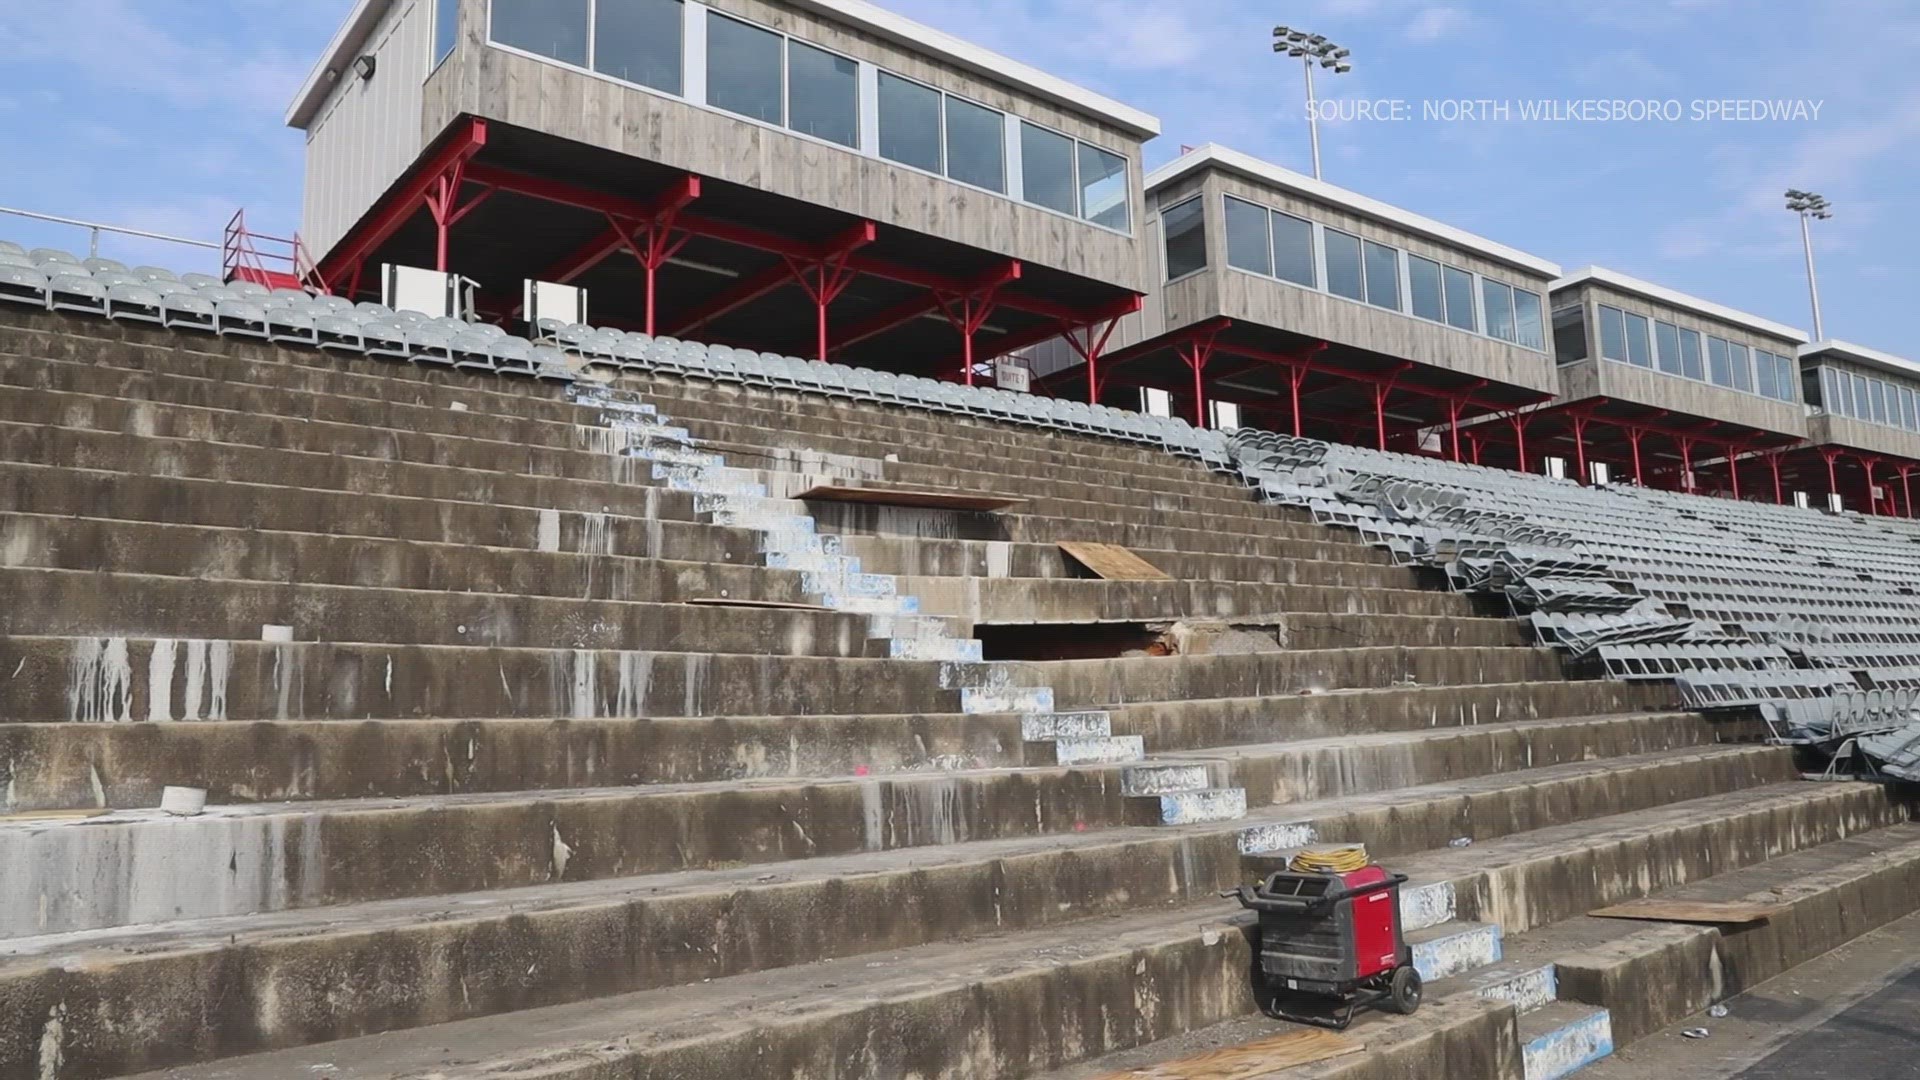 North Wilkesboro Speedway works to repair grandstands ahead of the 2024 NASCAR All-Star race.